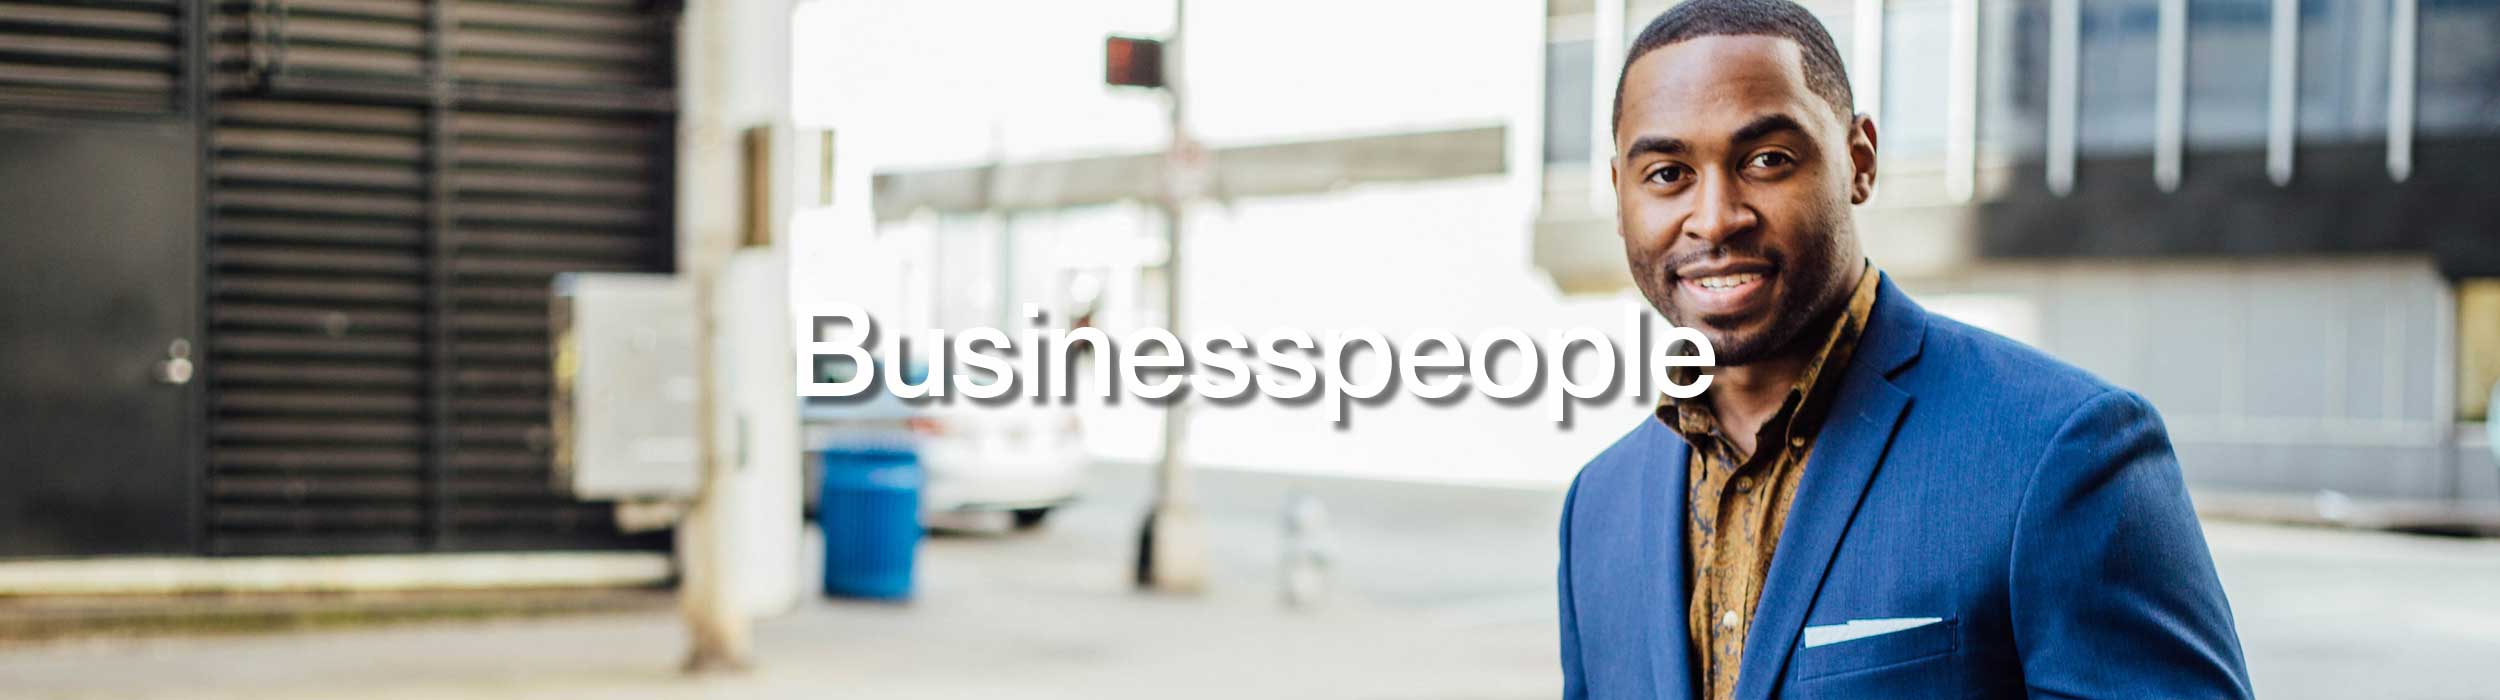 DJP Immigration Services-Businesspeople